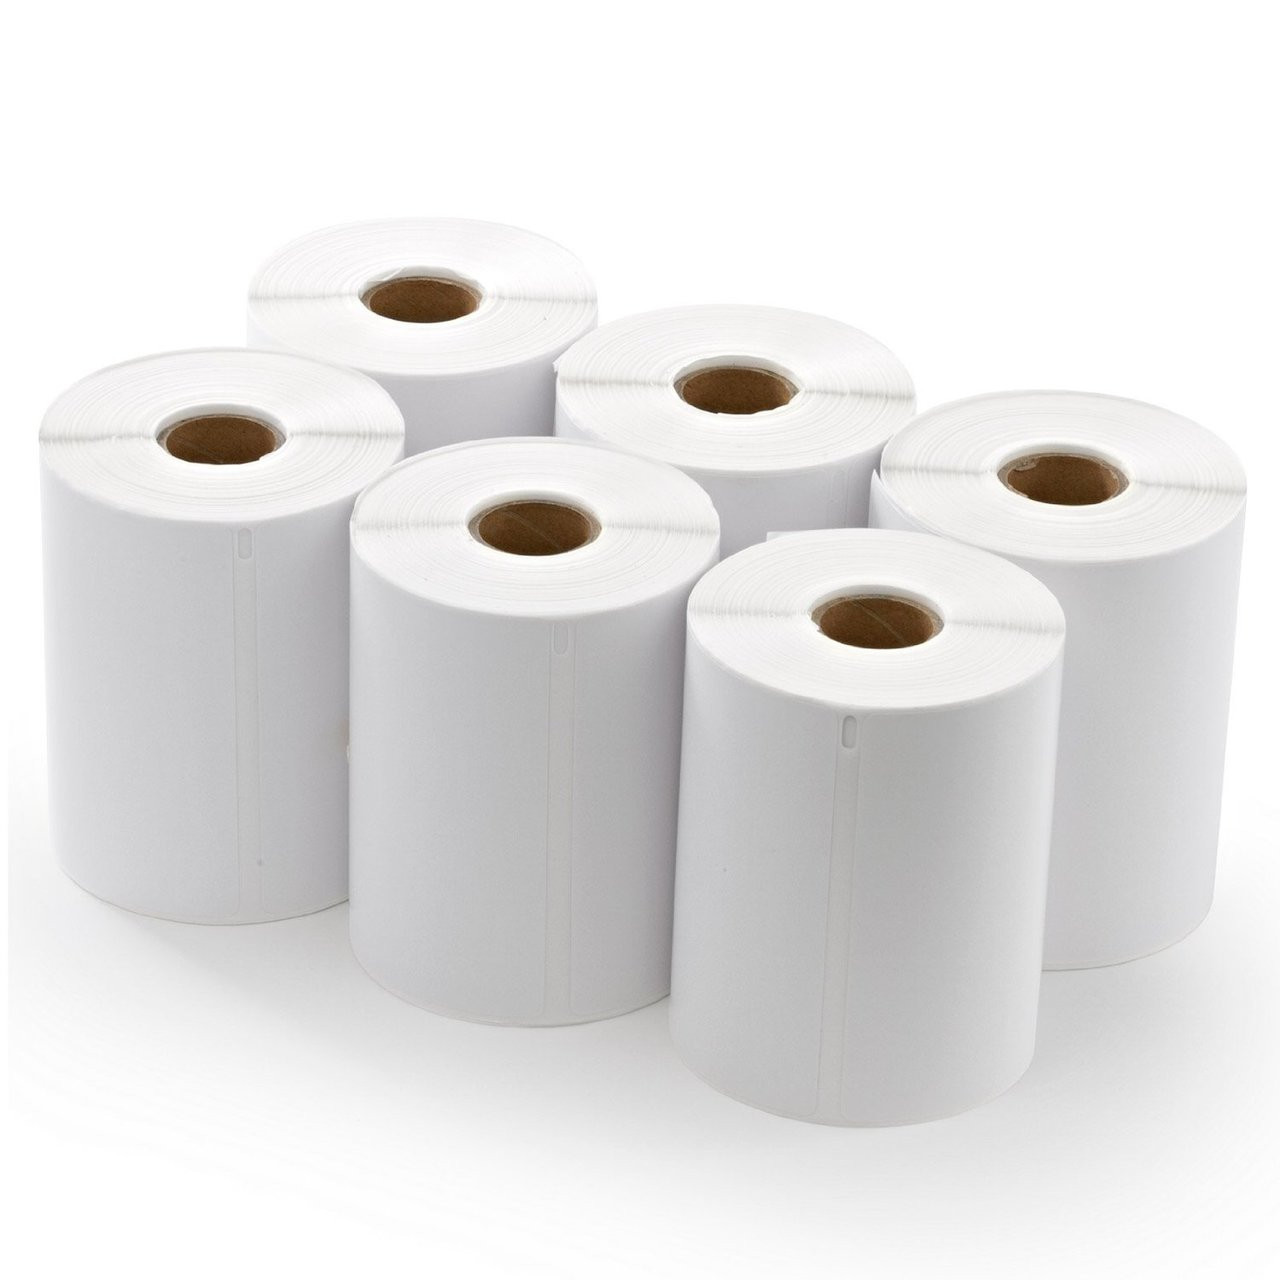 Dymo Compatible 1744907 - 4 x 6 4XL Internet Postage Shipping Labels (4 Rolls - 220 Labels per Roll)